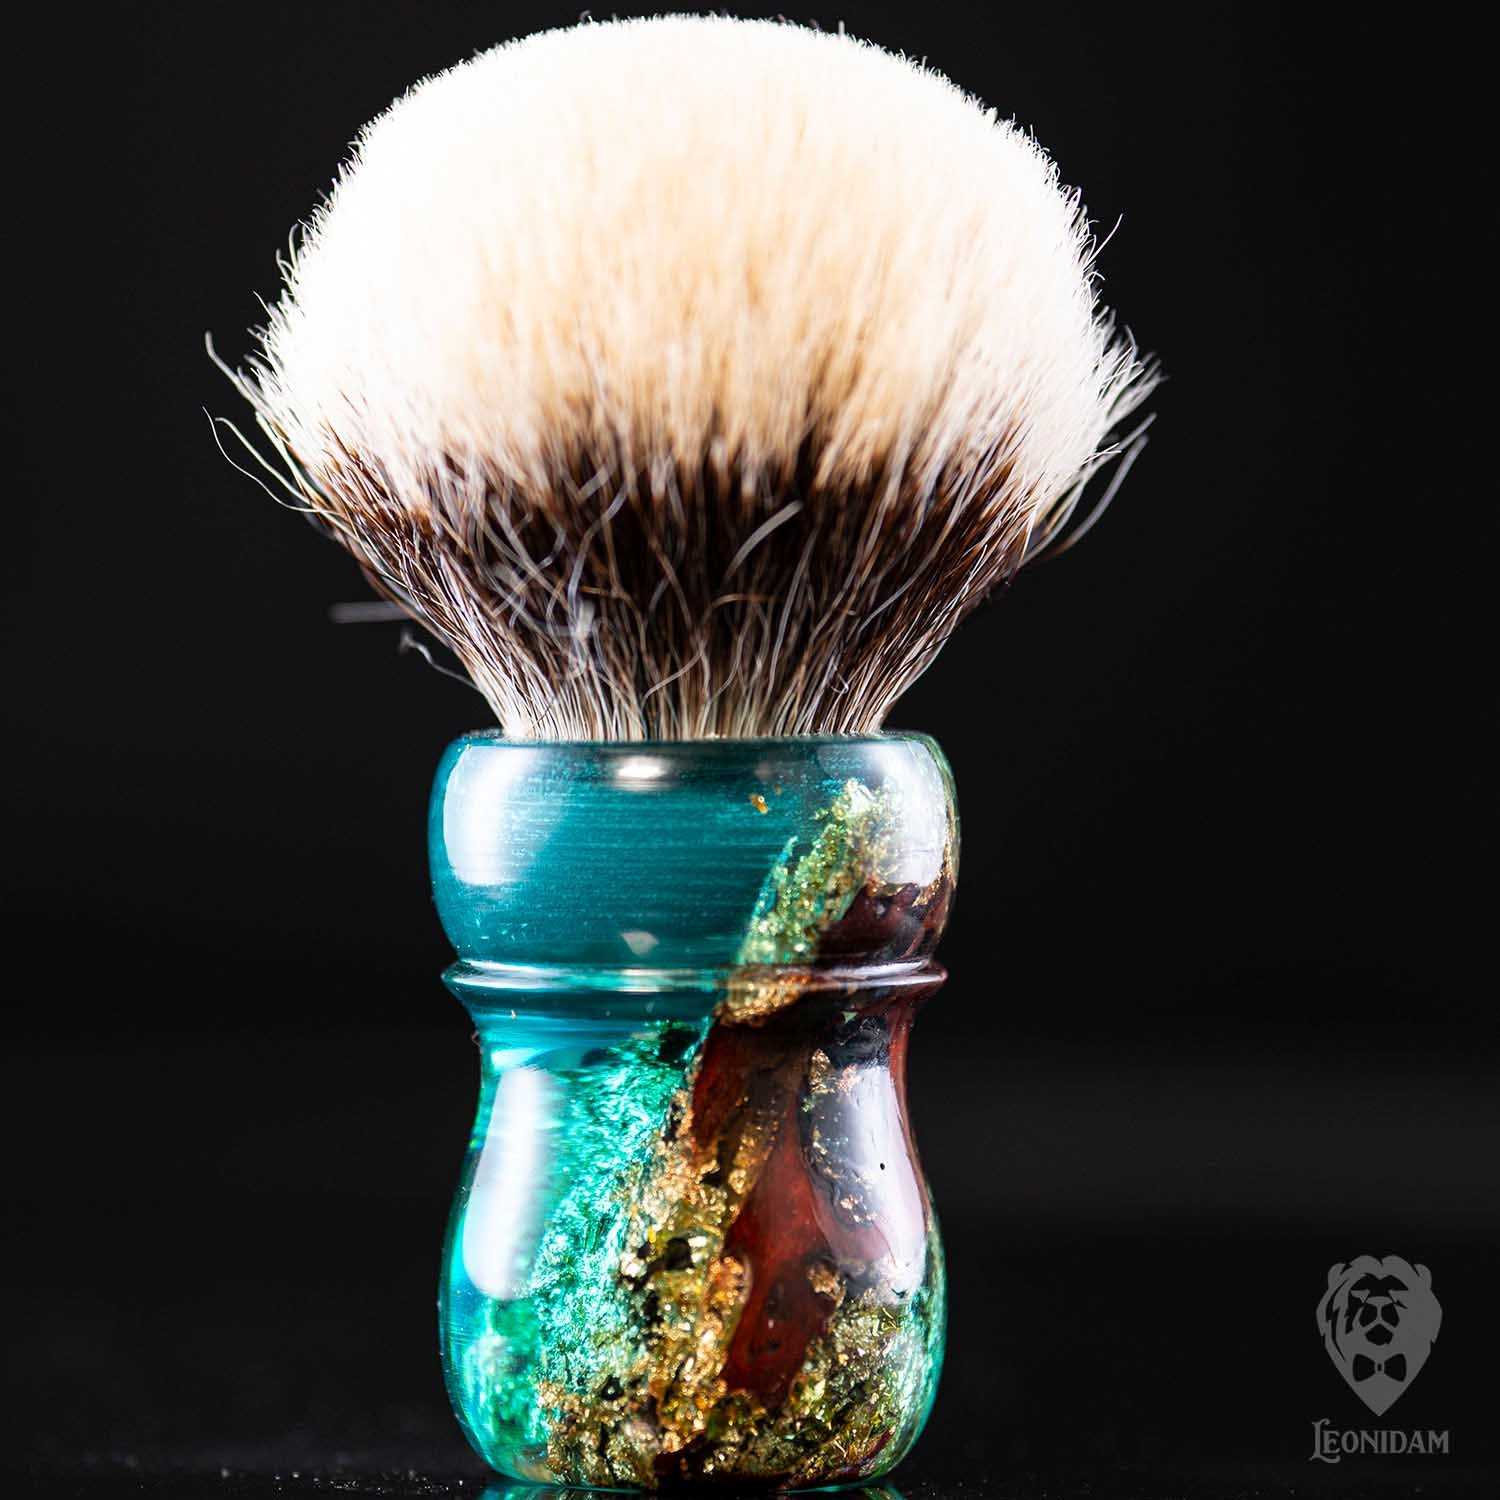 Handmade Shaving Brush "Doge" in stabilized mooring post wood covered with gold and blue resin